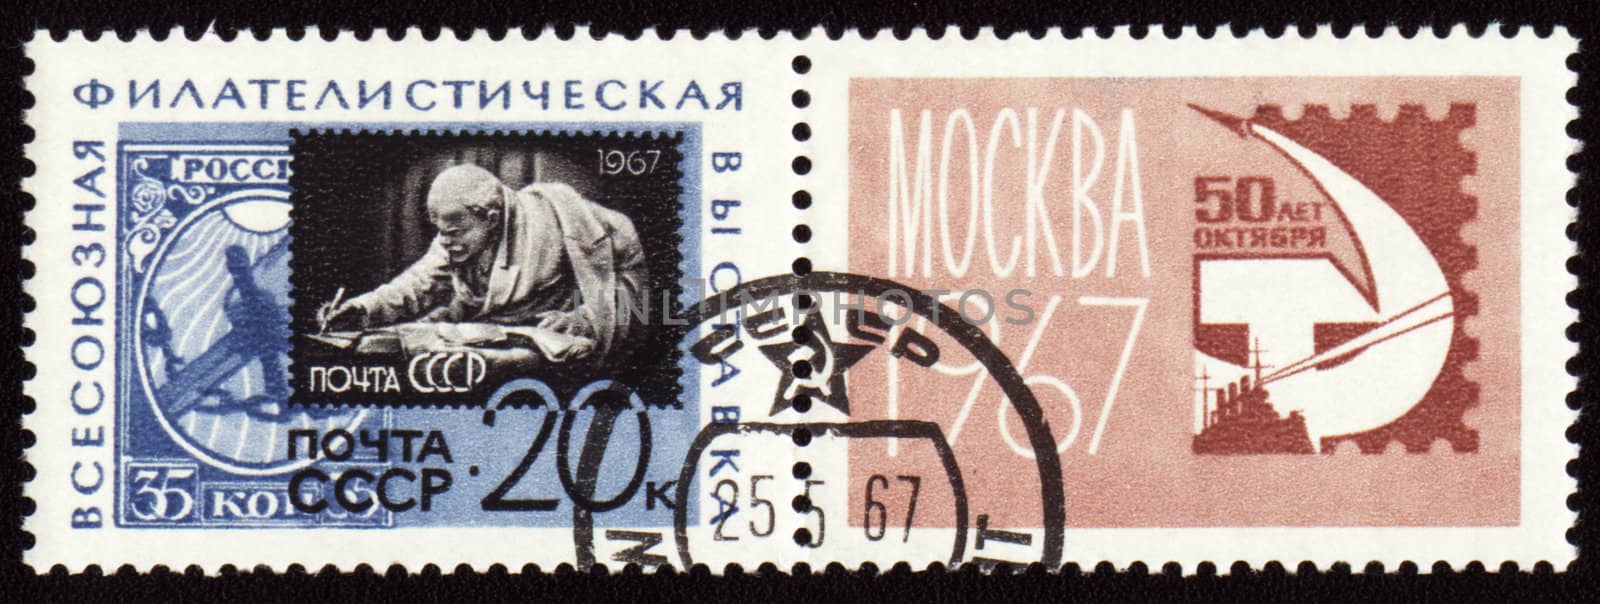 Lenin on postage stamp by wander